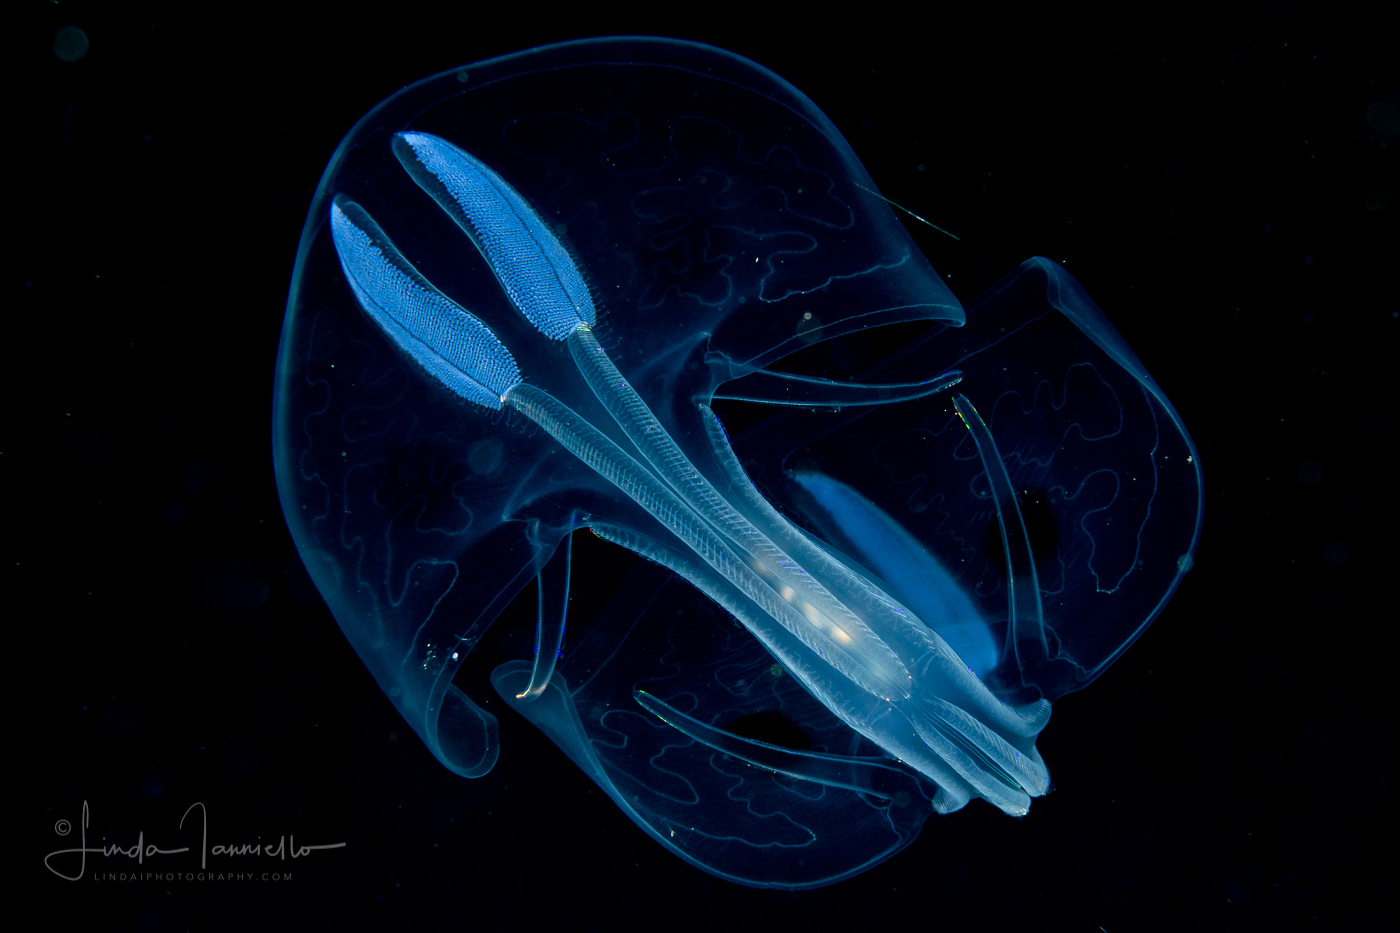 Ctenophore - Winged Comb Jelly - Ocyropsis maculata immaculata